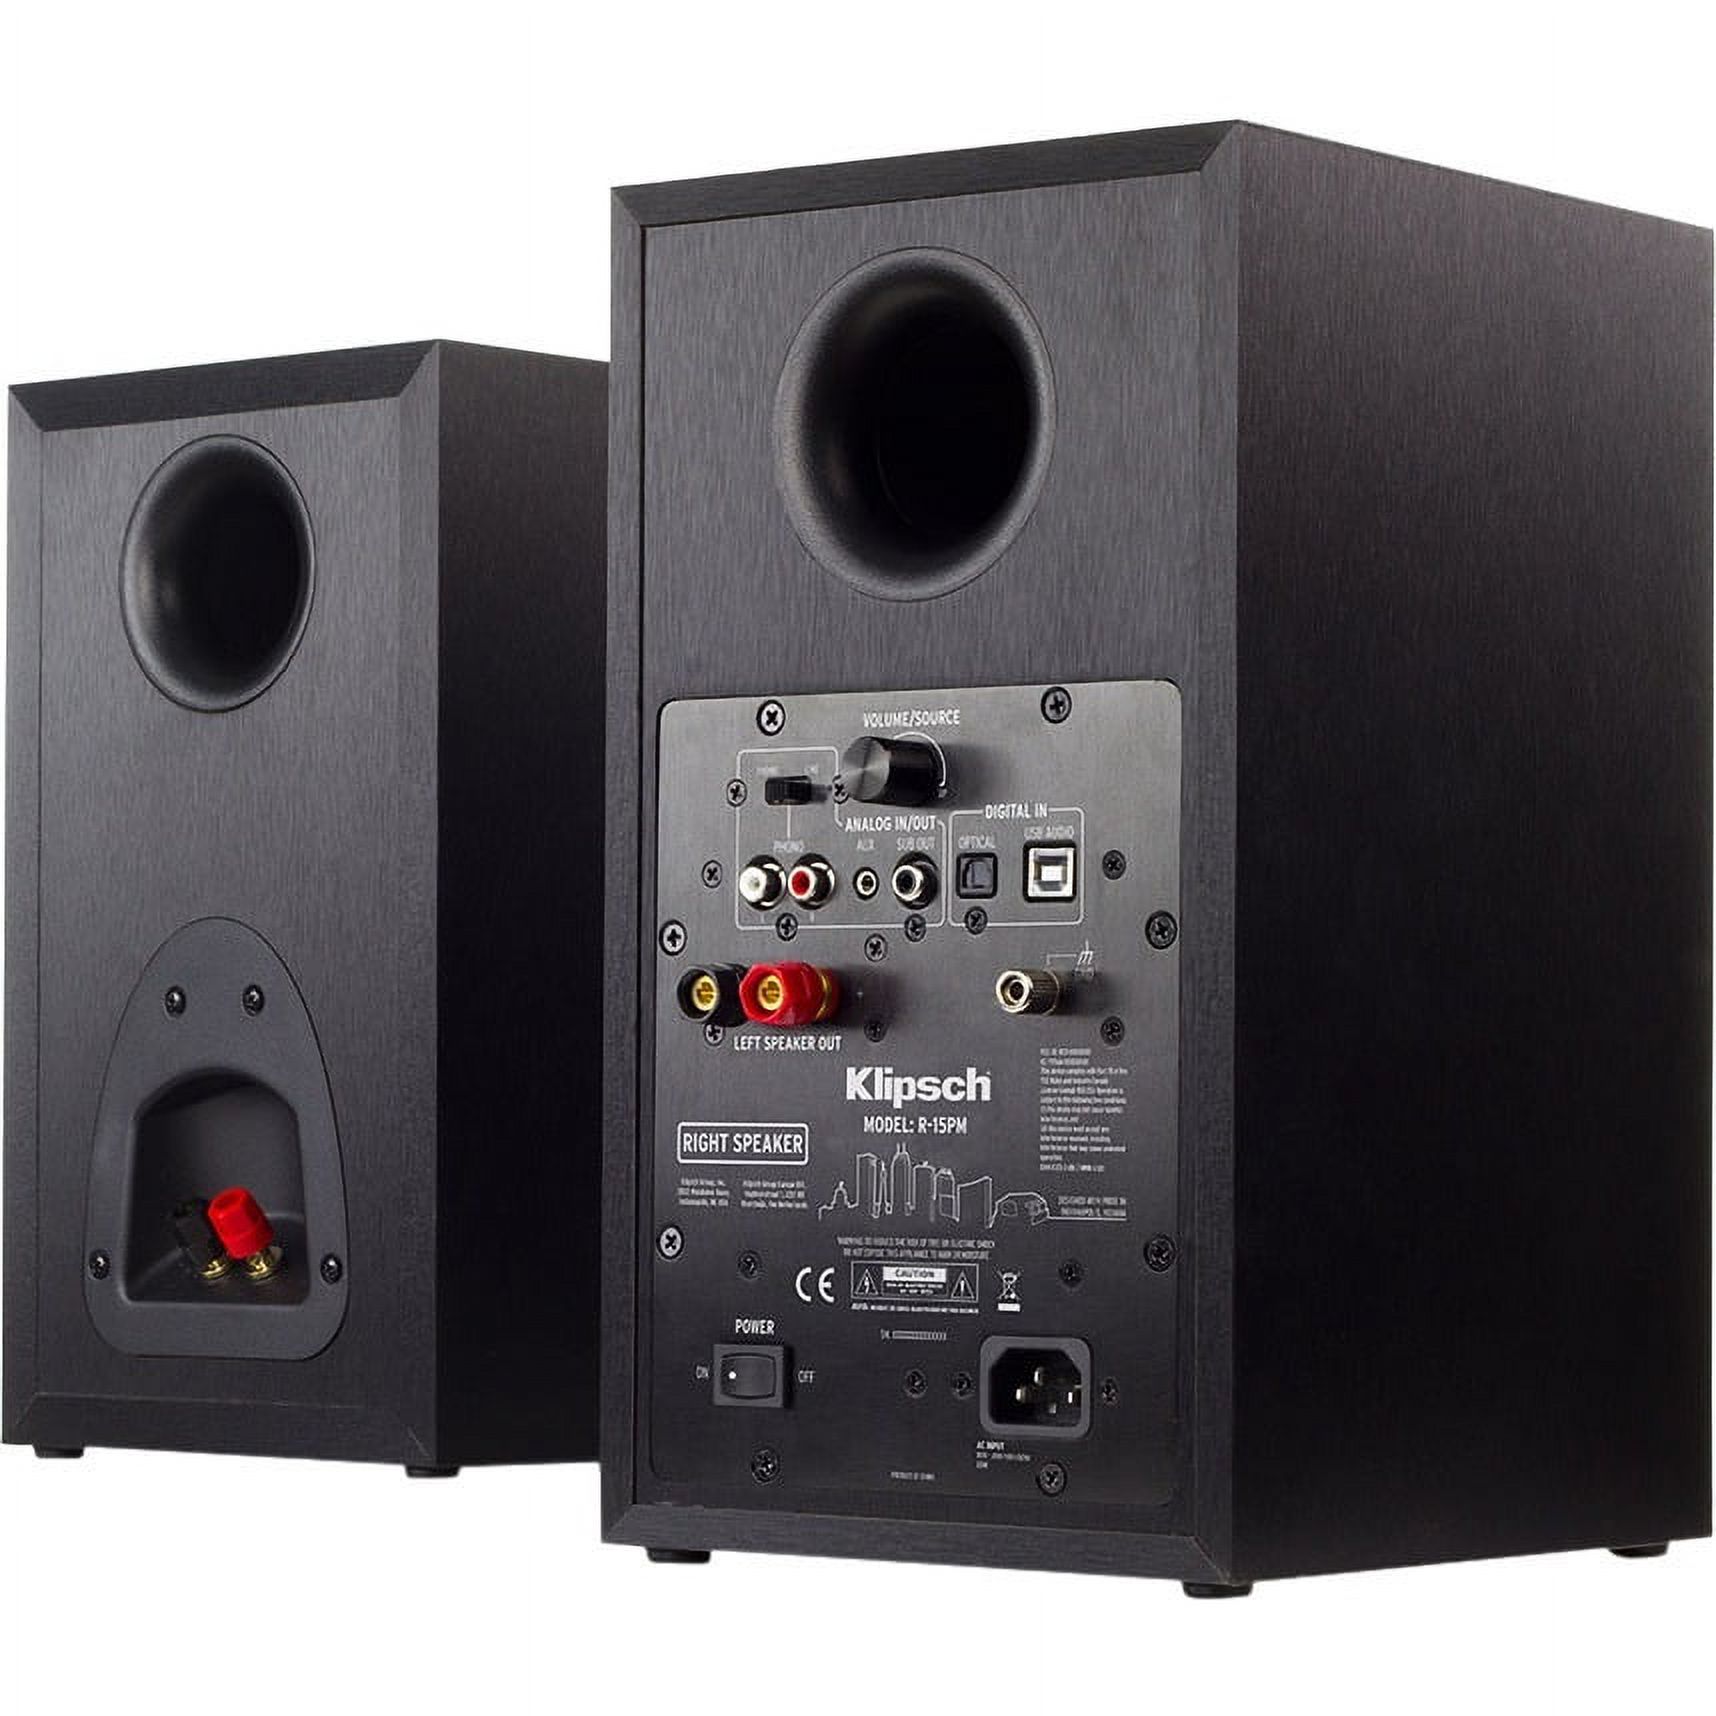 Klipsch R-15PM Powered Monitors, 2 Self Powered Easy to Use Speakers and Wireless Bluetooth Technology, Digital Optical and Analog RCA and USB Inputs. - image 4 of 8